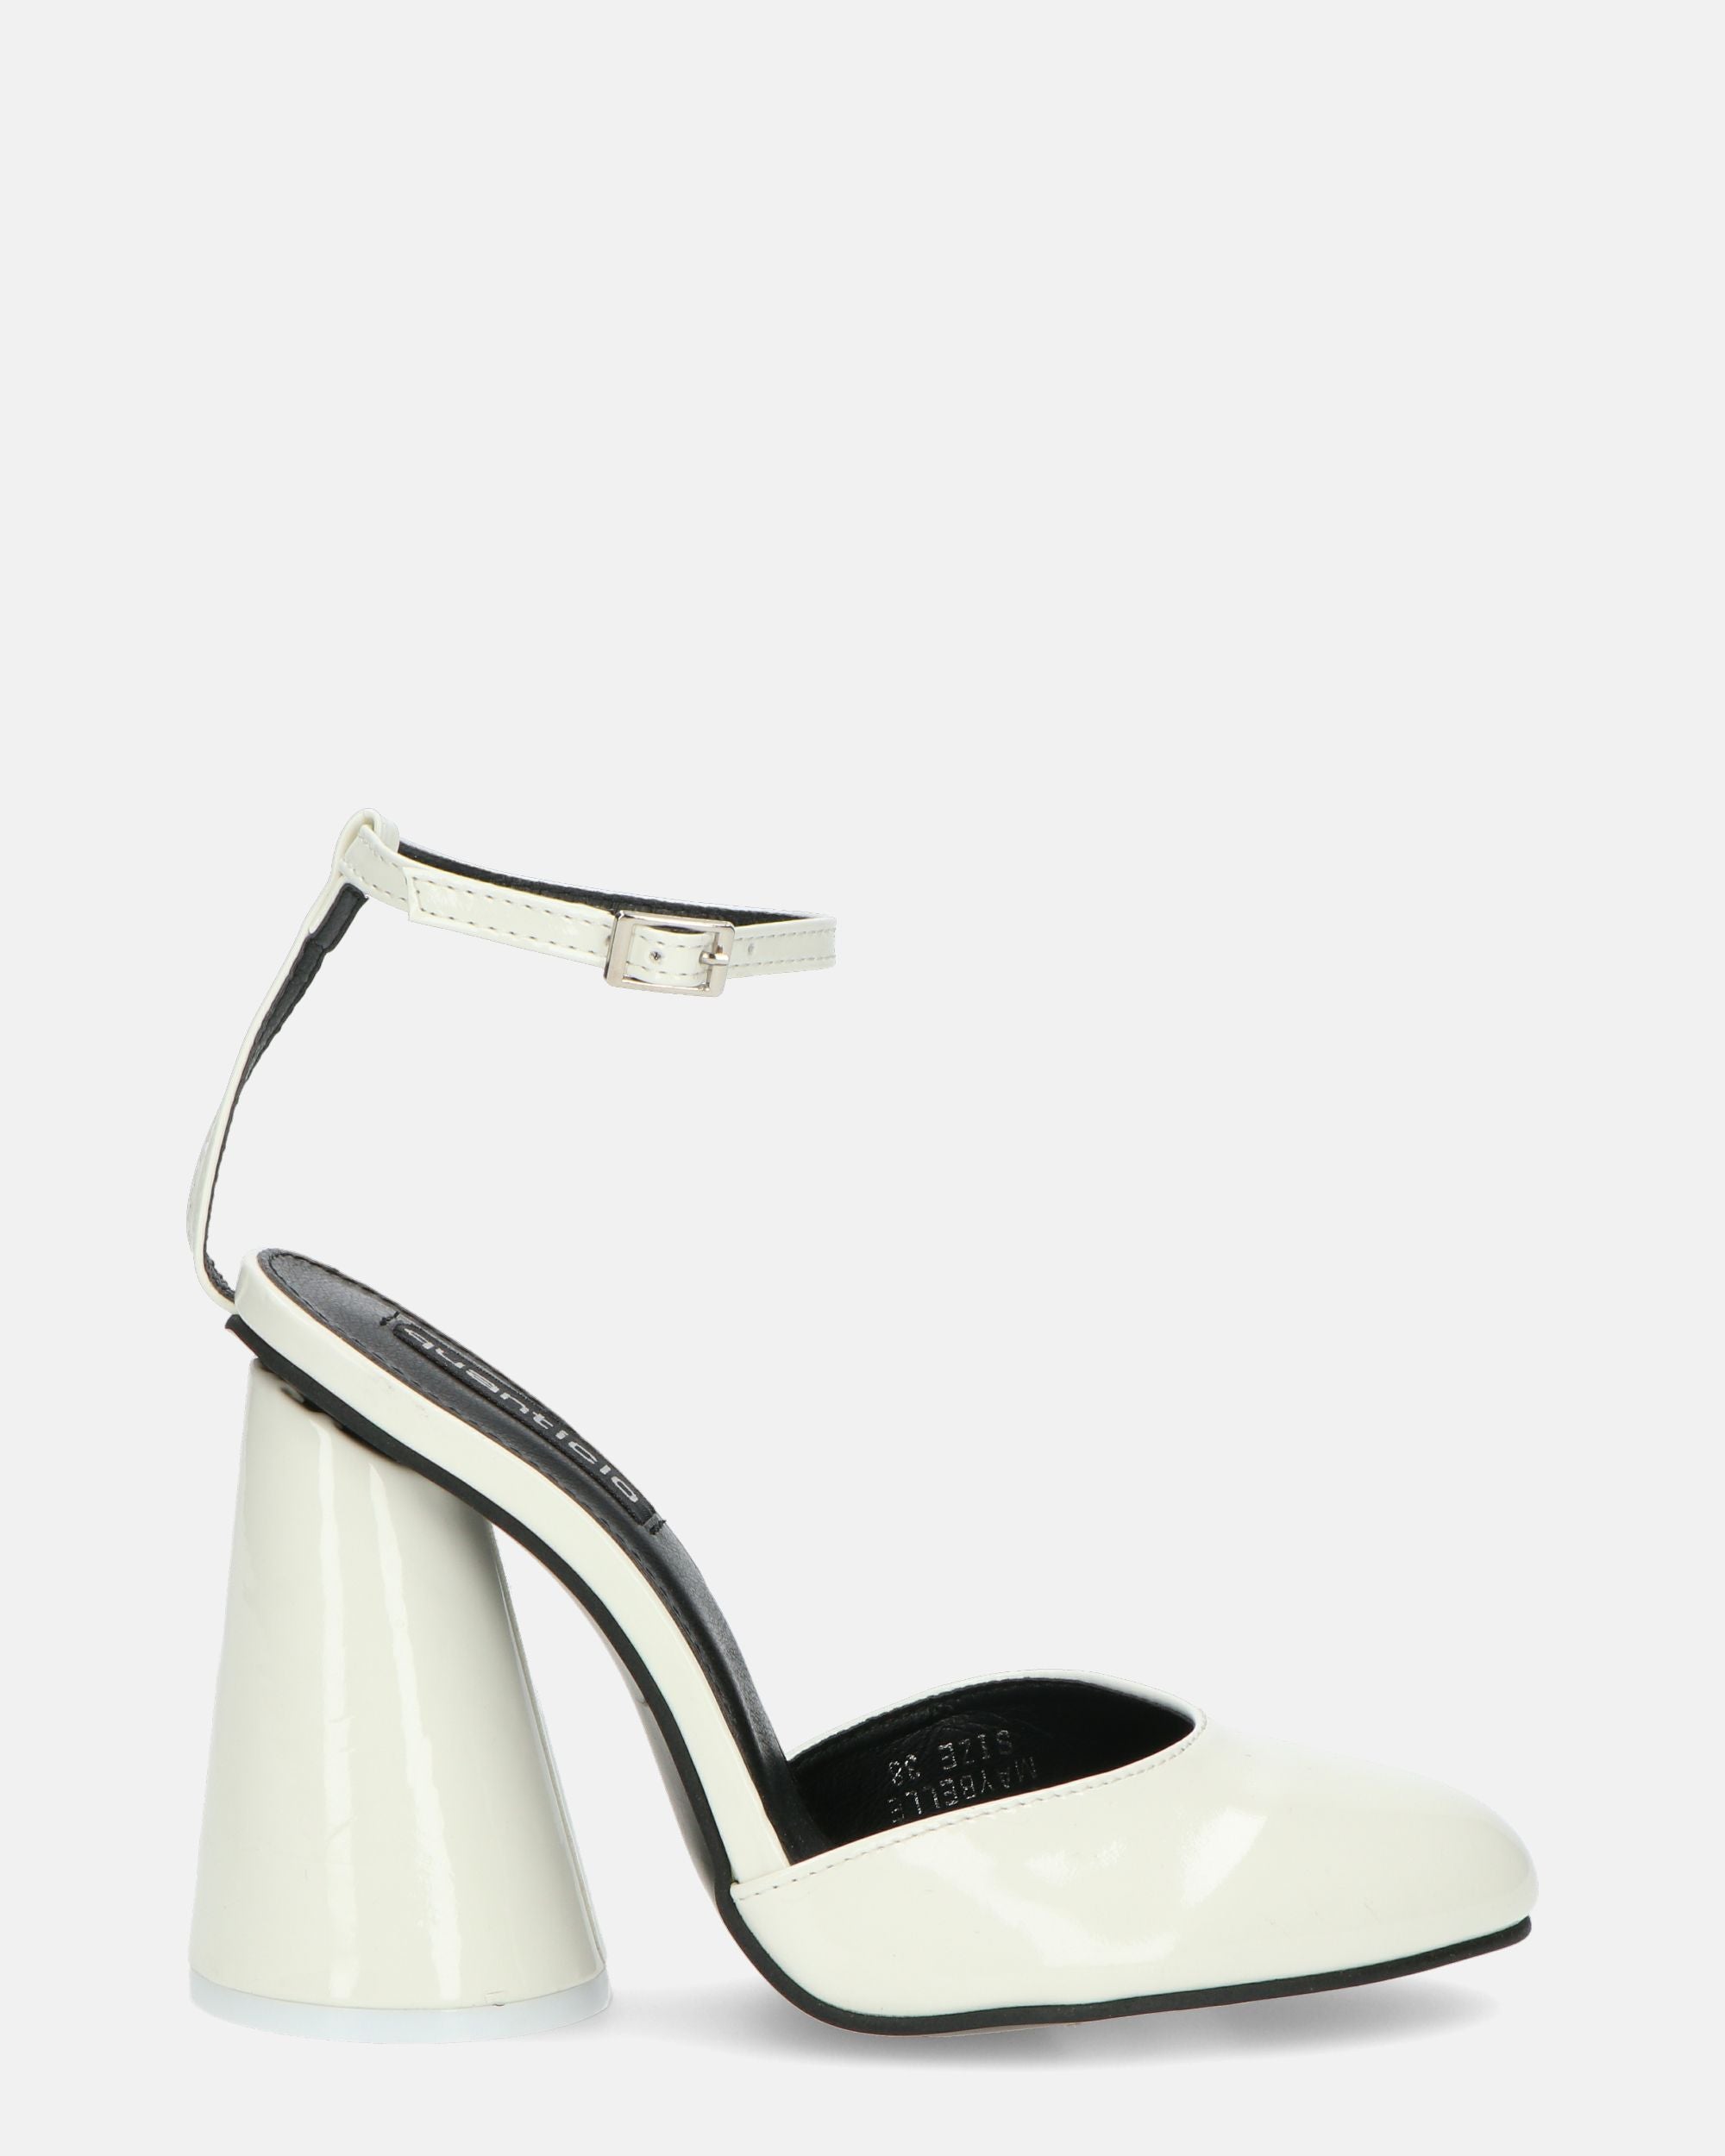 MAYBELLE - white glassy sandals with cylindrical heel